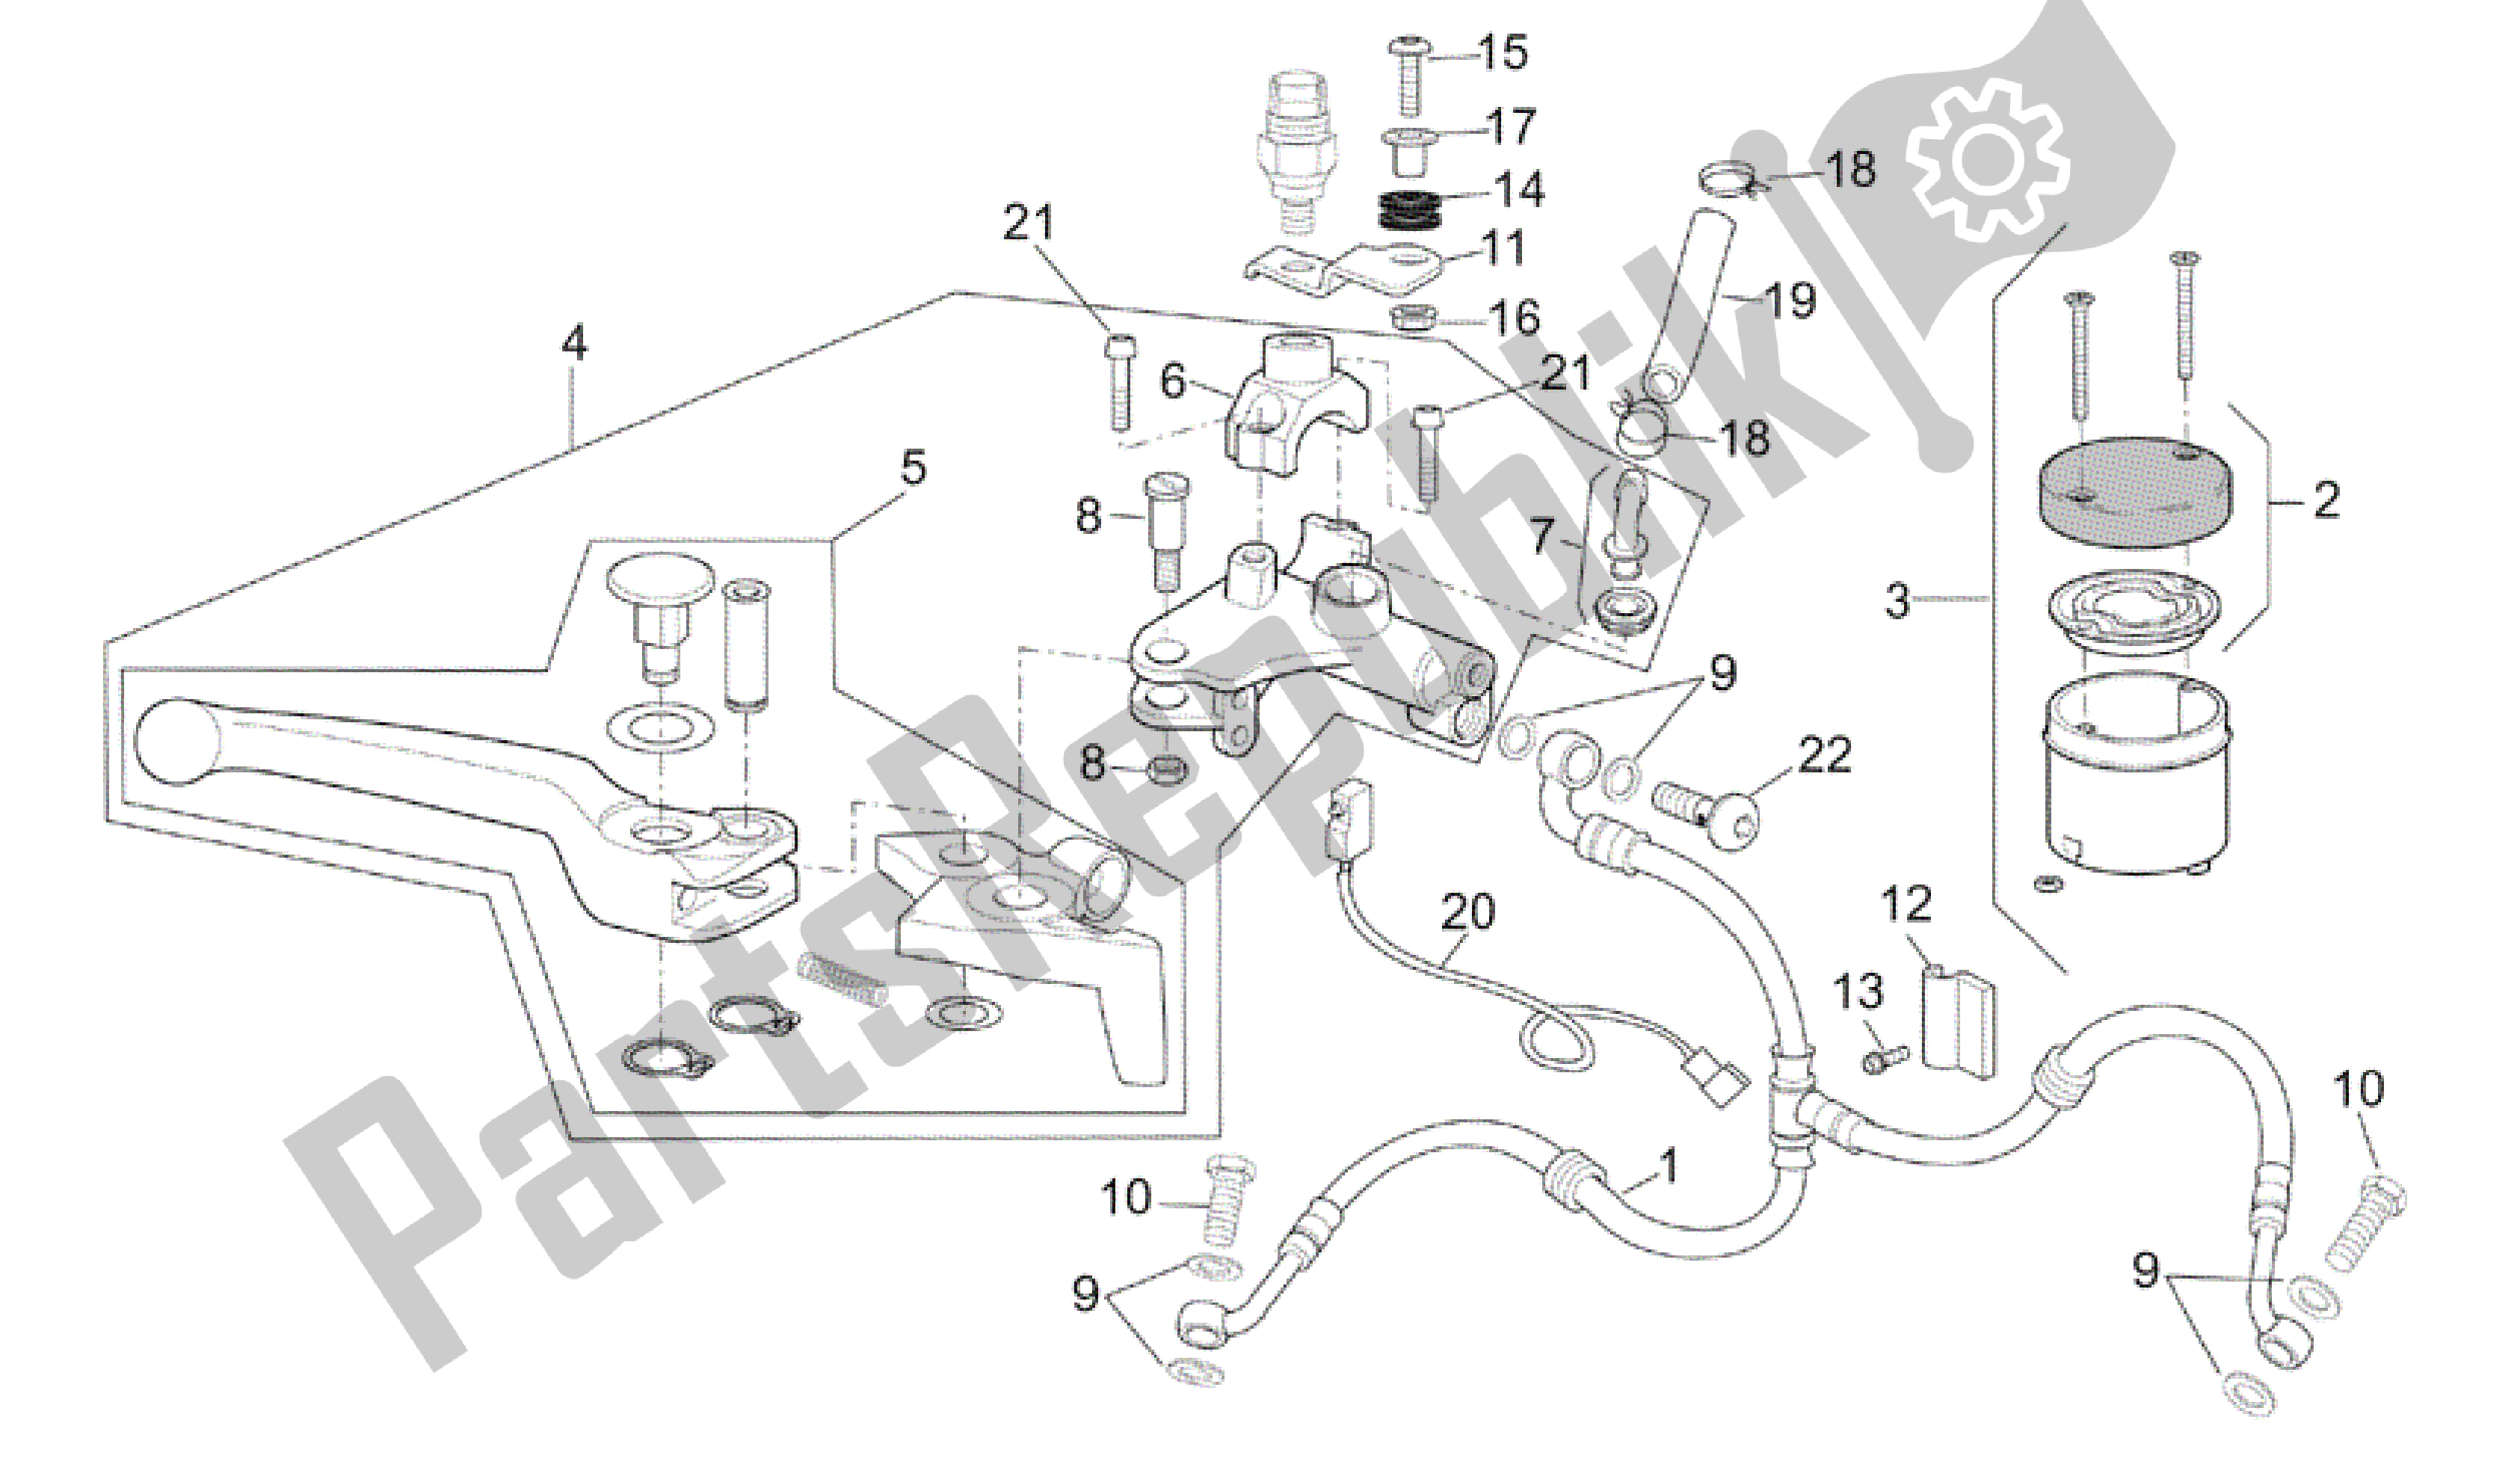 All parts for the Front Master Cilinder of the Aprilia RSV Tuono RS 1000 2004 - 2005